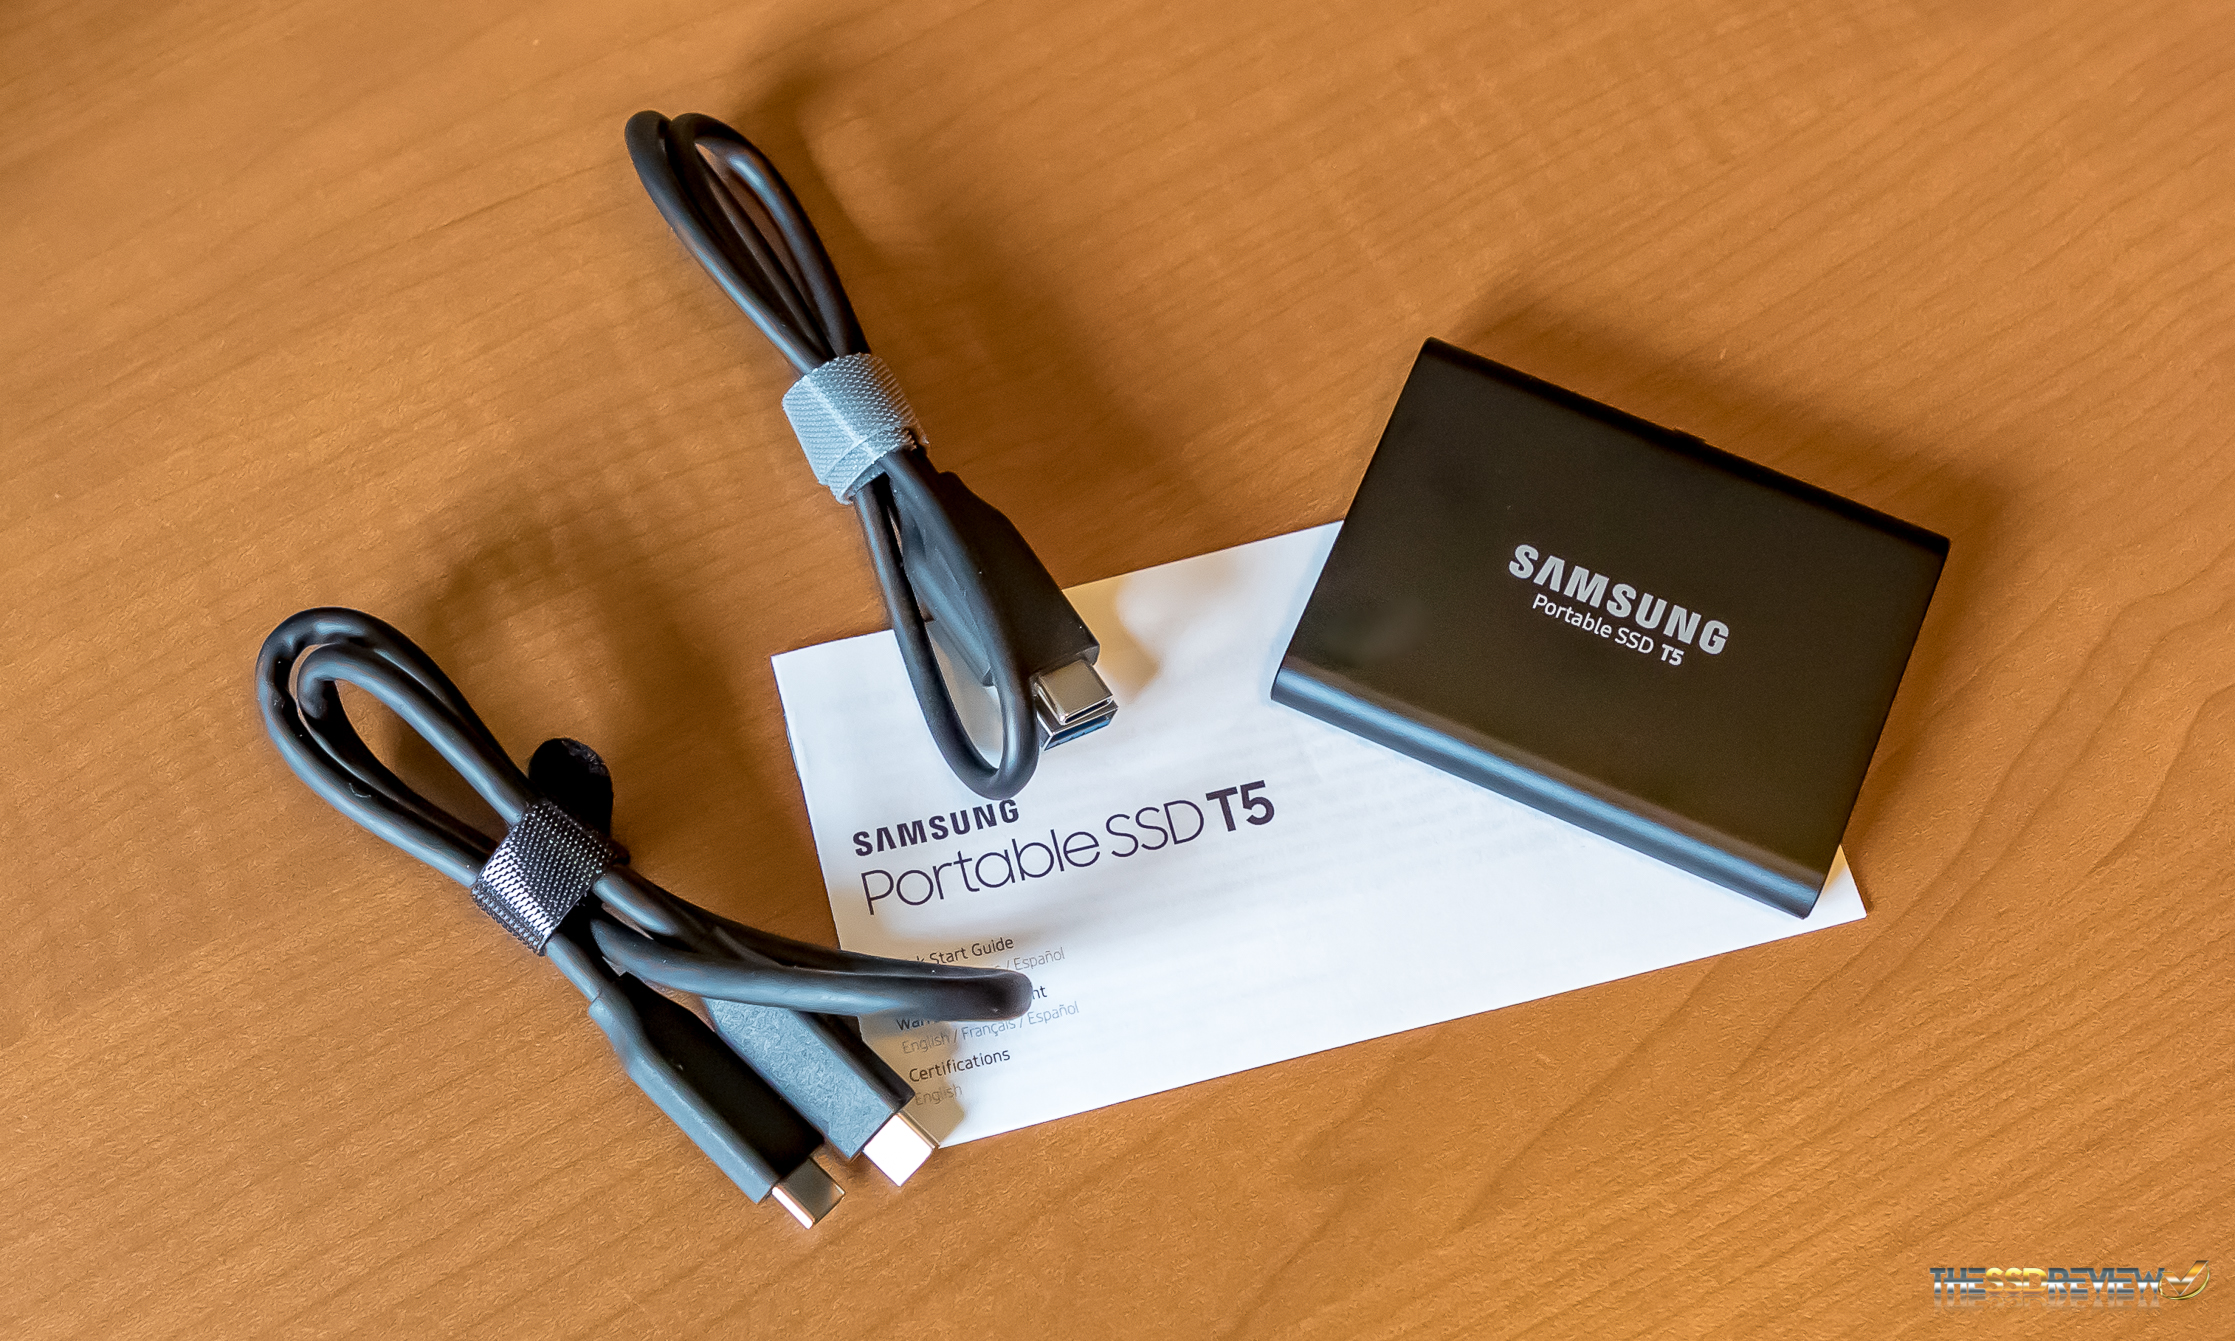 Samsung Portable SSD T5 Review: 64-Layer V-NAND Debuts in Retail